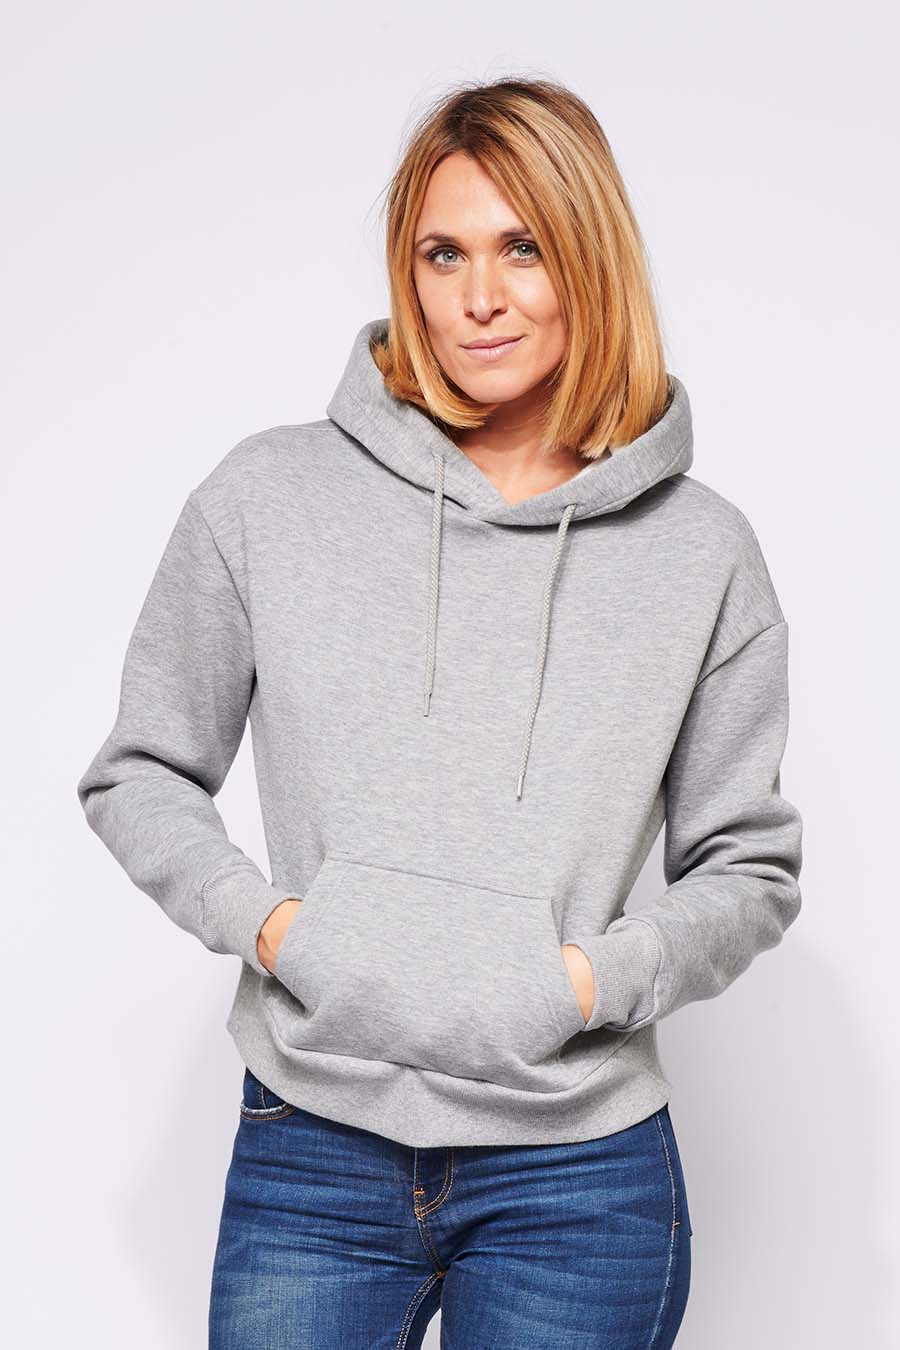 Sweat à capuche hoodie Femme made in France Sally gris-clair - FIL ROUGE